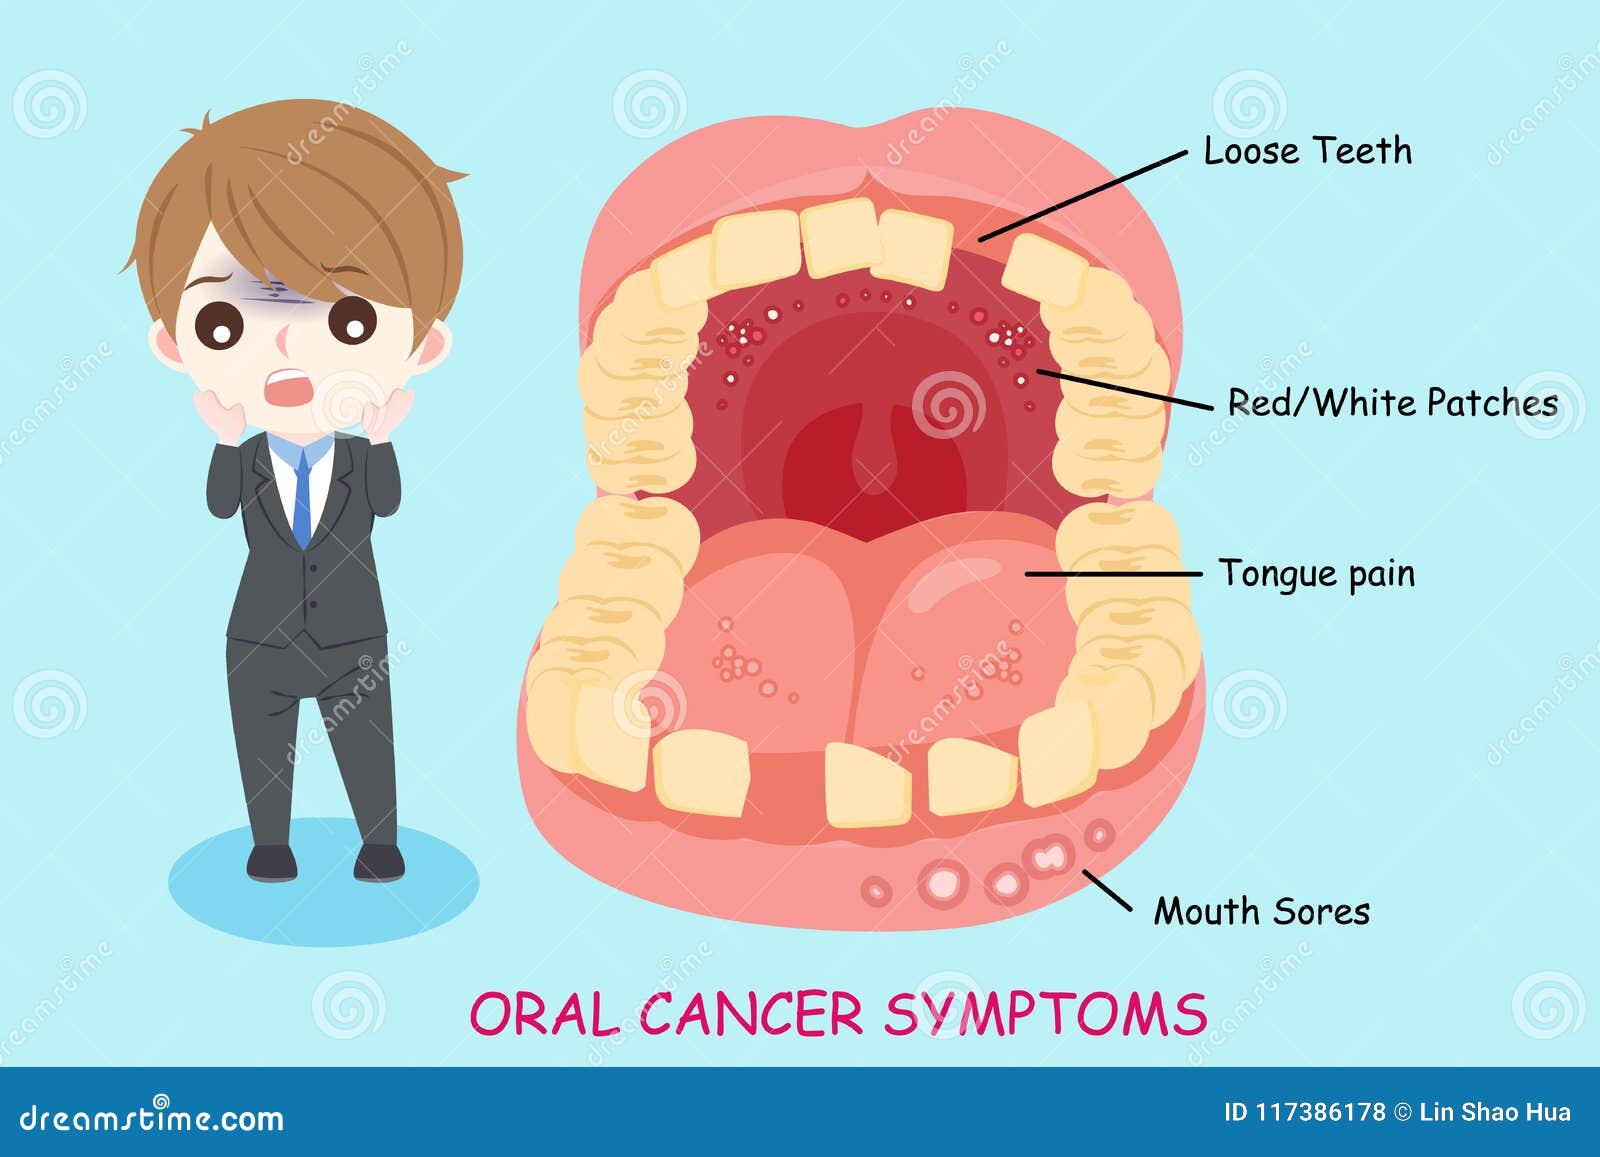 man with oral cancer symptoms